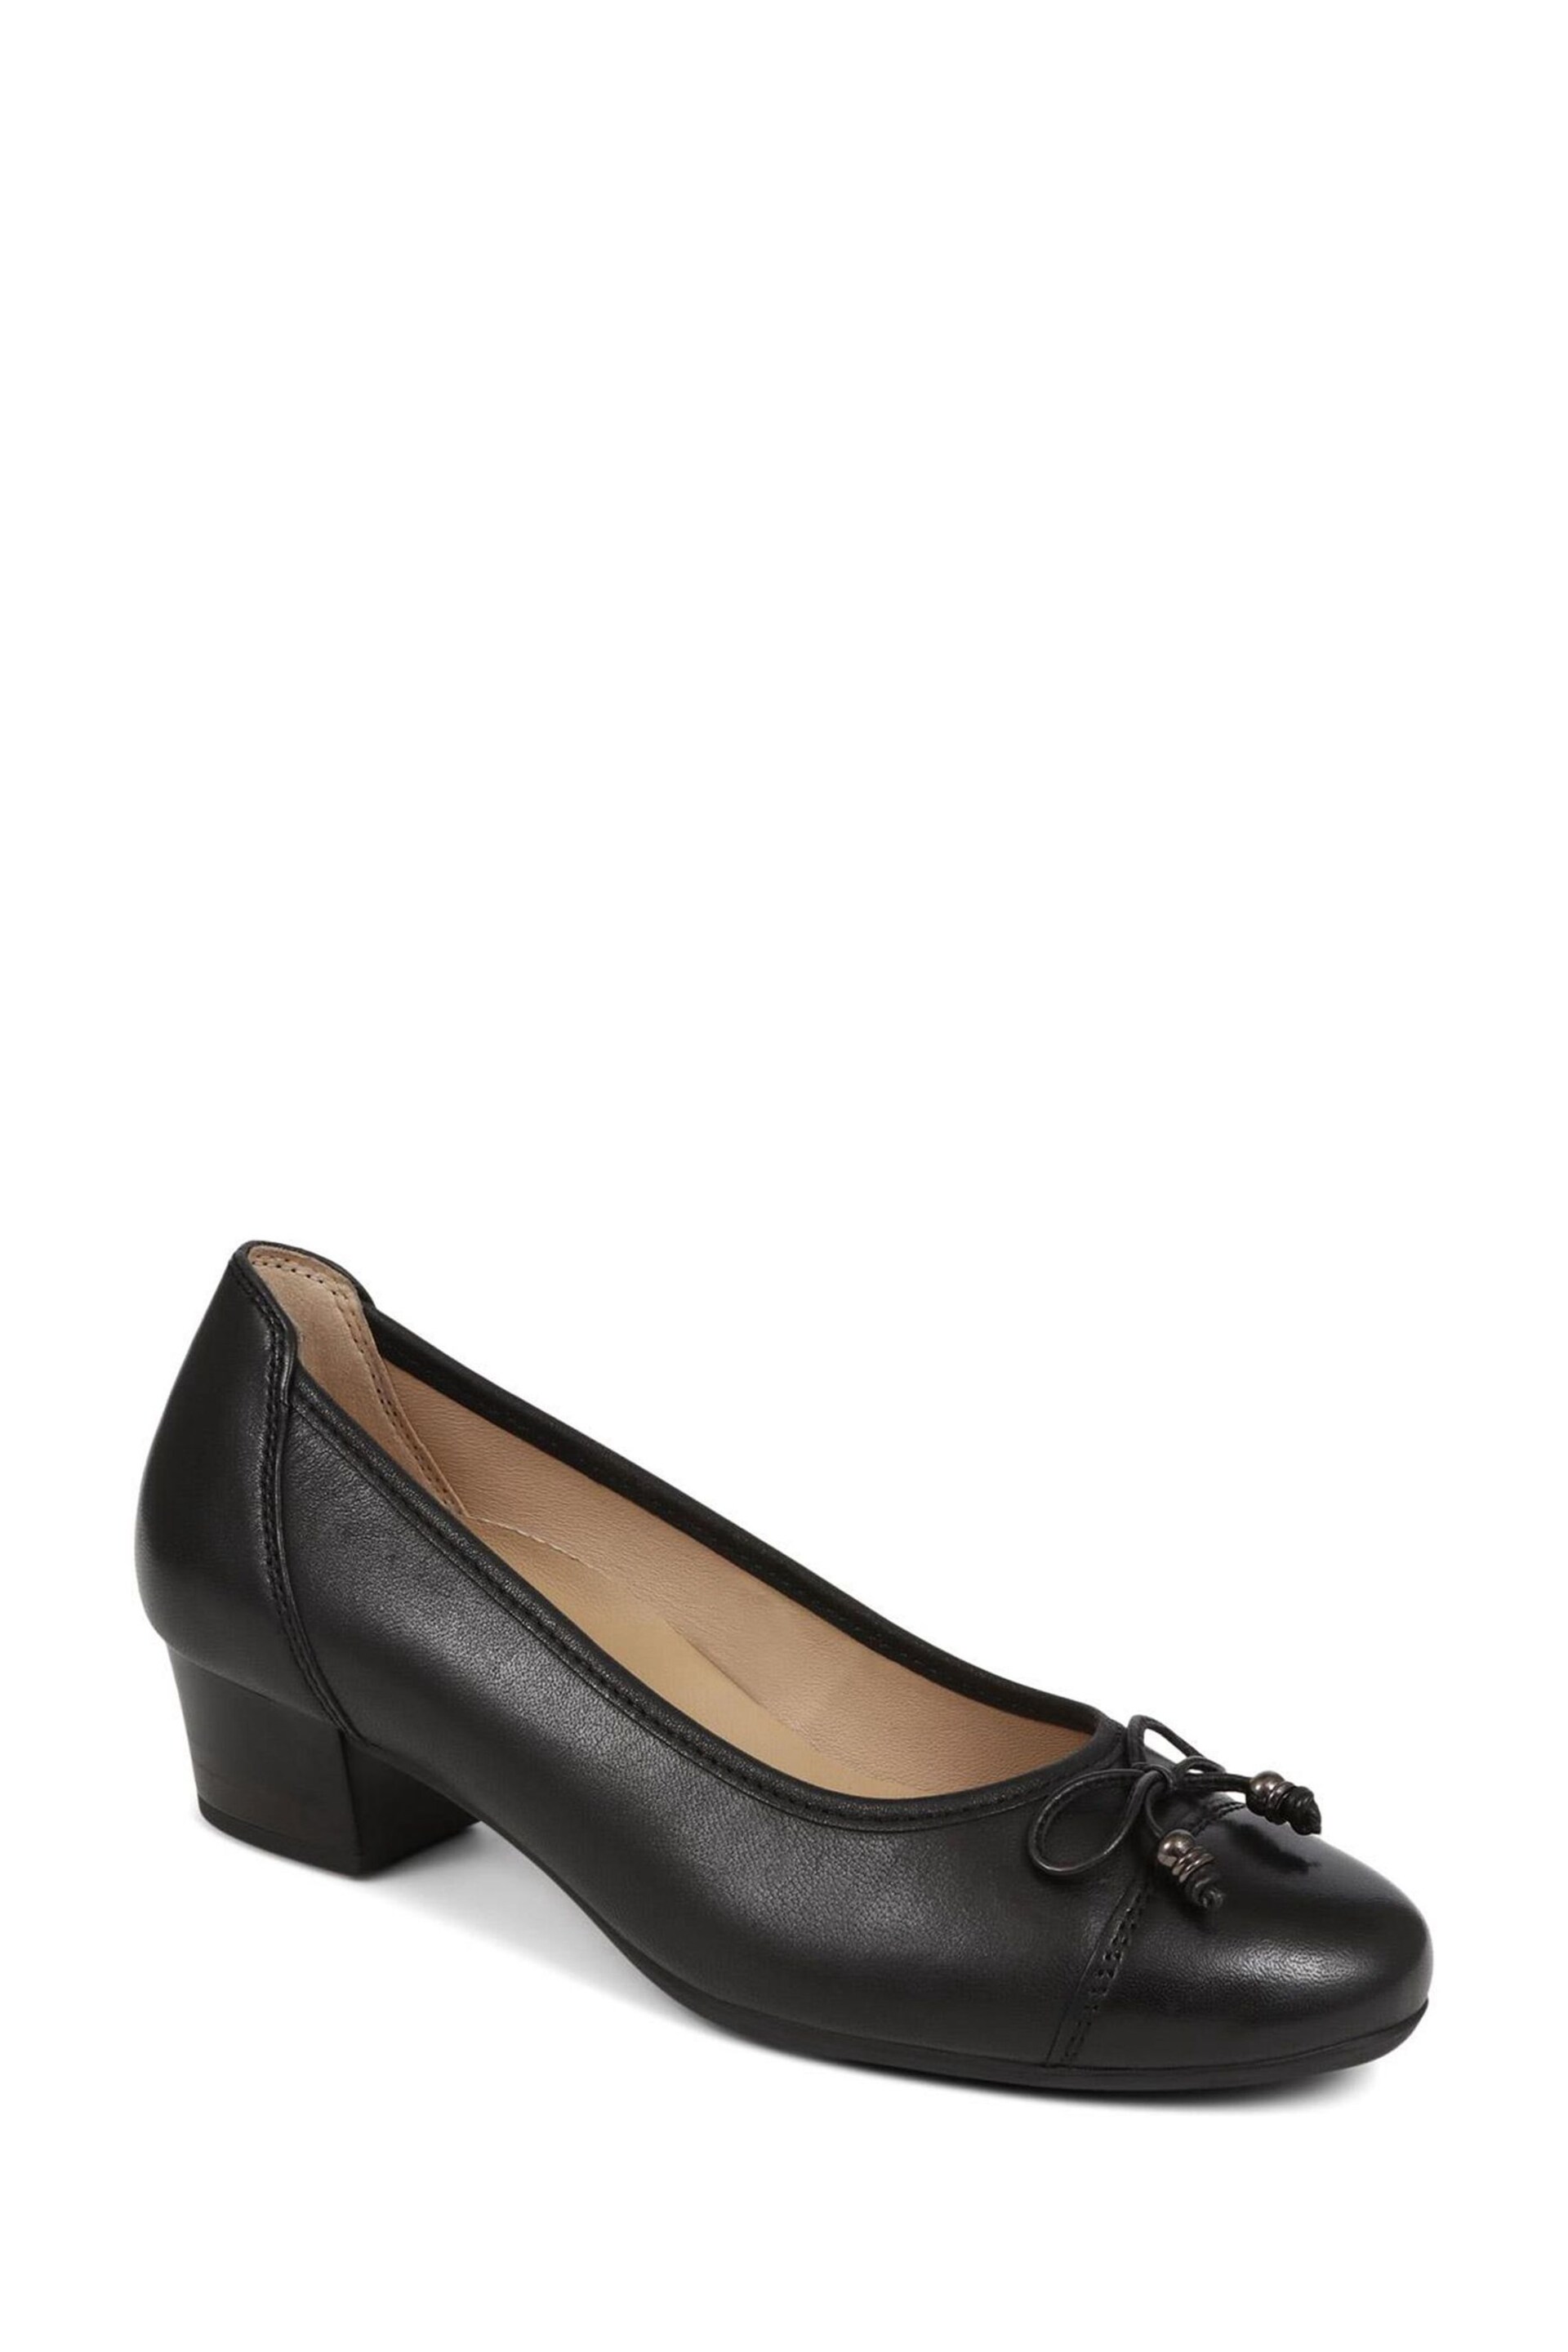 Pavers Leather Block Heel Court Black Shoes - Image 4 of 5